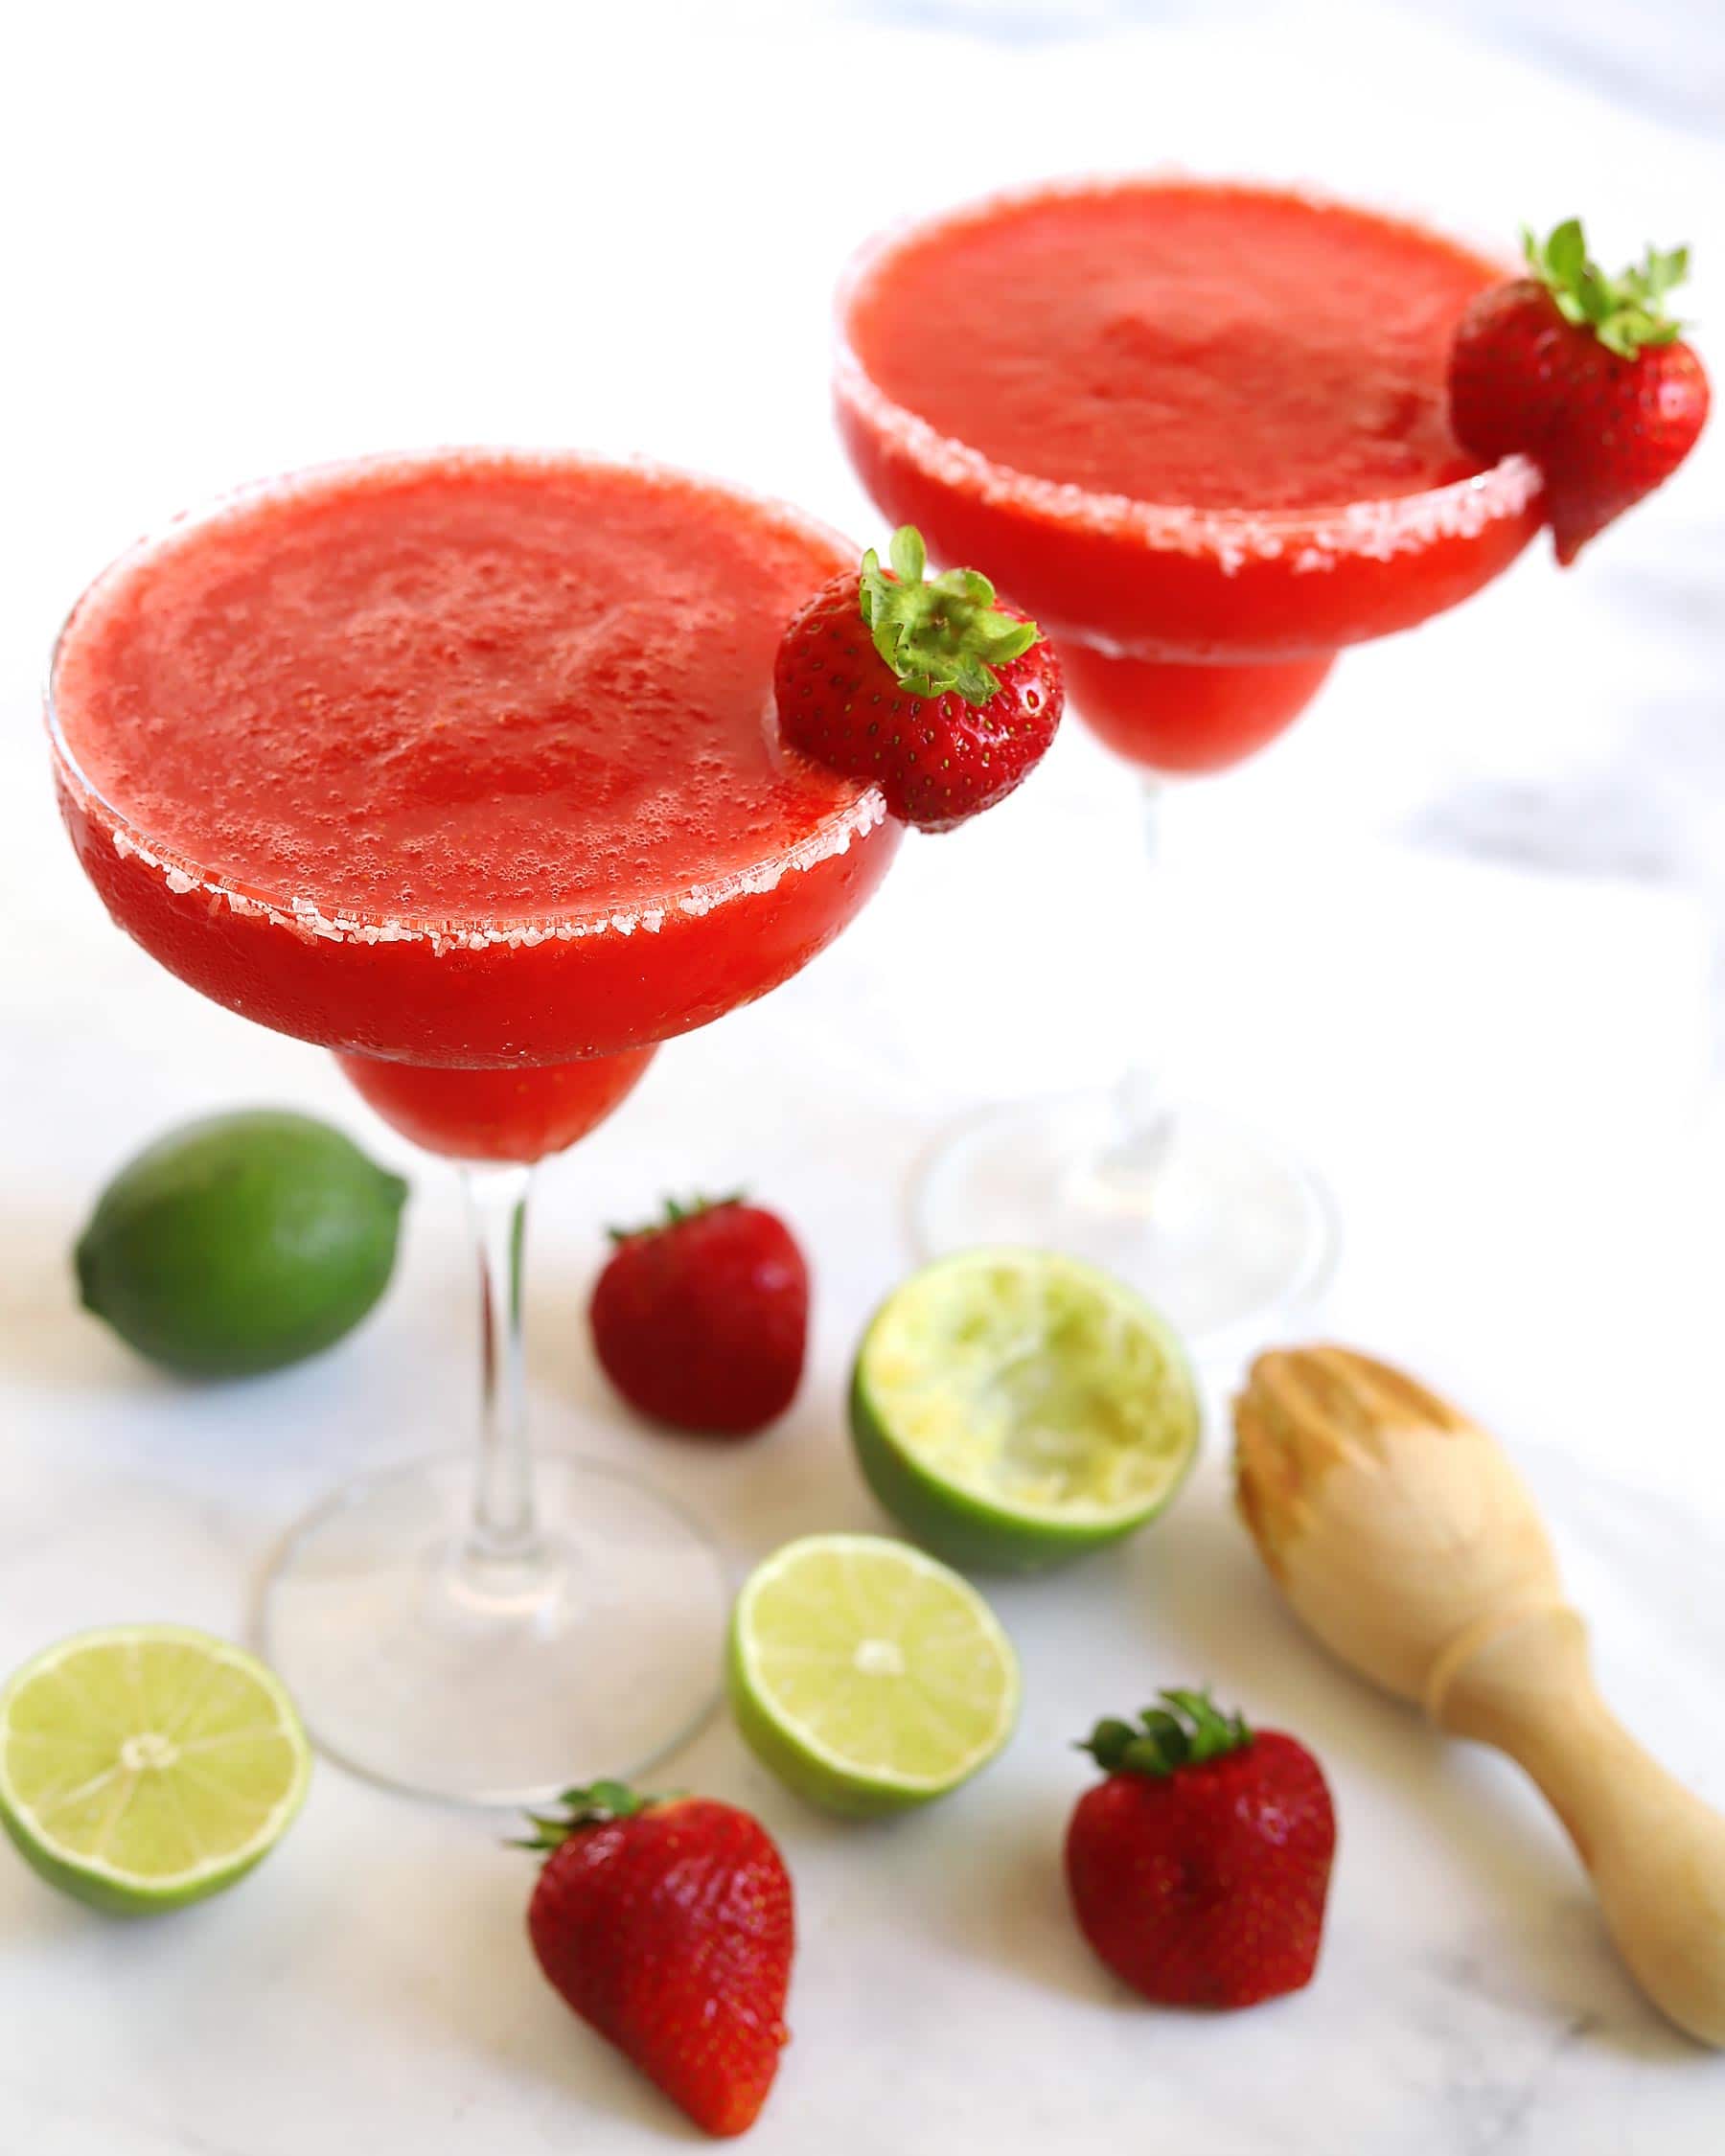 THE SELTZERITA - Margarita meets hard seltzer!! #ad Msg 4 21+ So refreshing and easy to make! Perfect for game day or really any occasion! These strawberry seltzeritas are gluten free, have no added sugar, and only take about 5 minutes to make! #BudLightSeltzerRecipe #UnquestionablyGood #SeltzerSZN #hardseltzer #healthycocktail #margarita #strawberrymargarita 